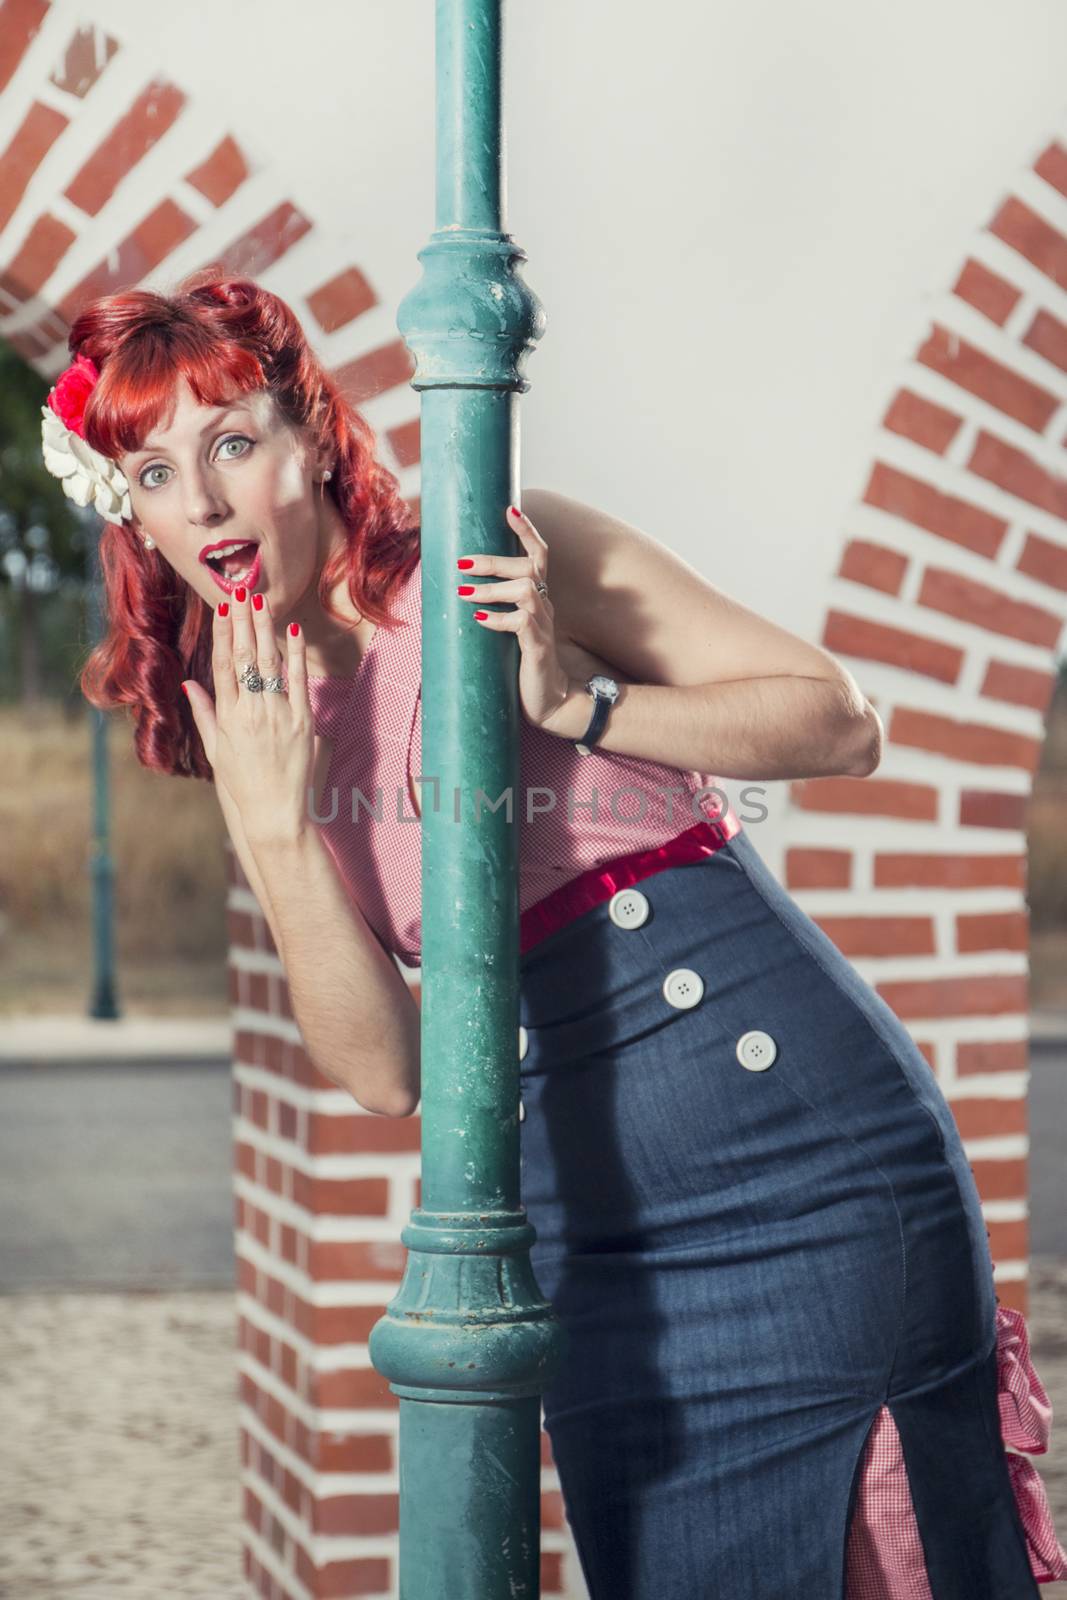 View of pinup young woman in vintage style clothing surprised.